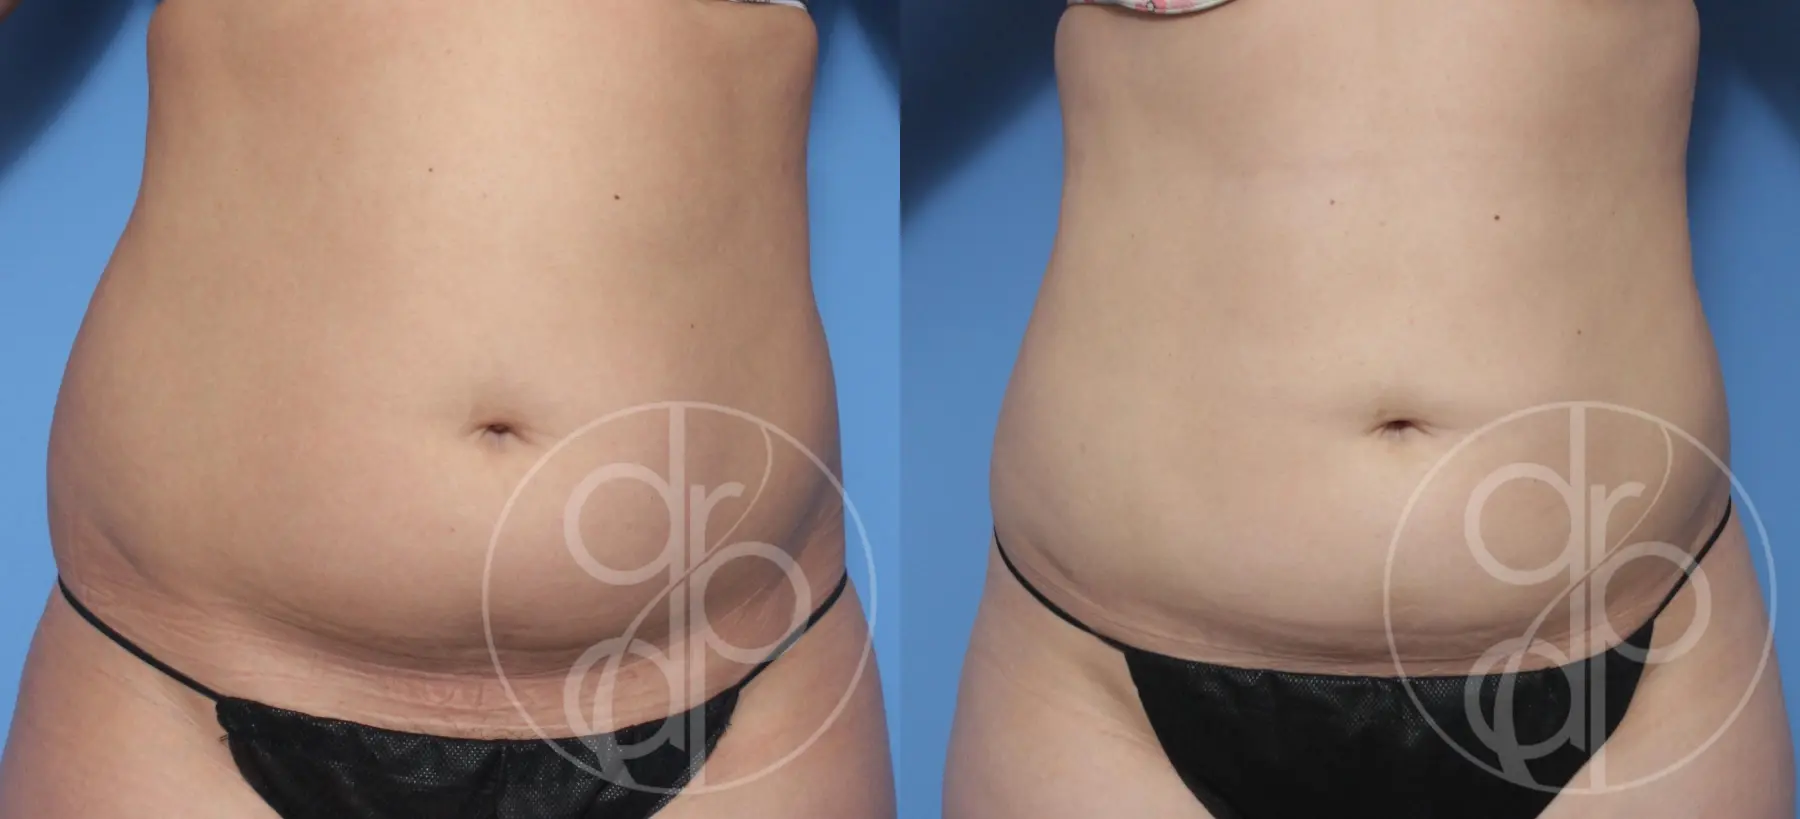 patient 12394 liposuction before and after result - Before and After 1